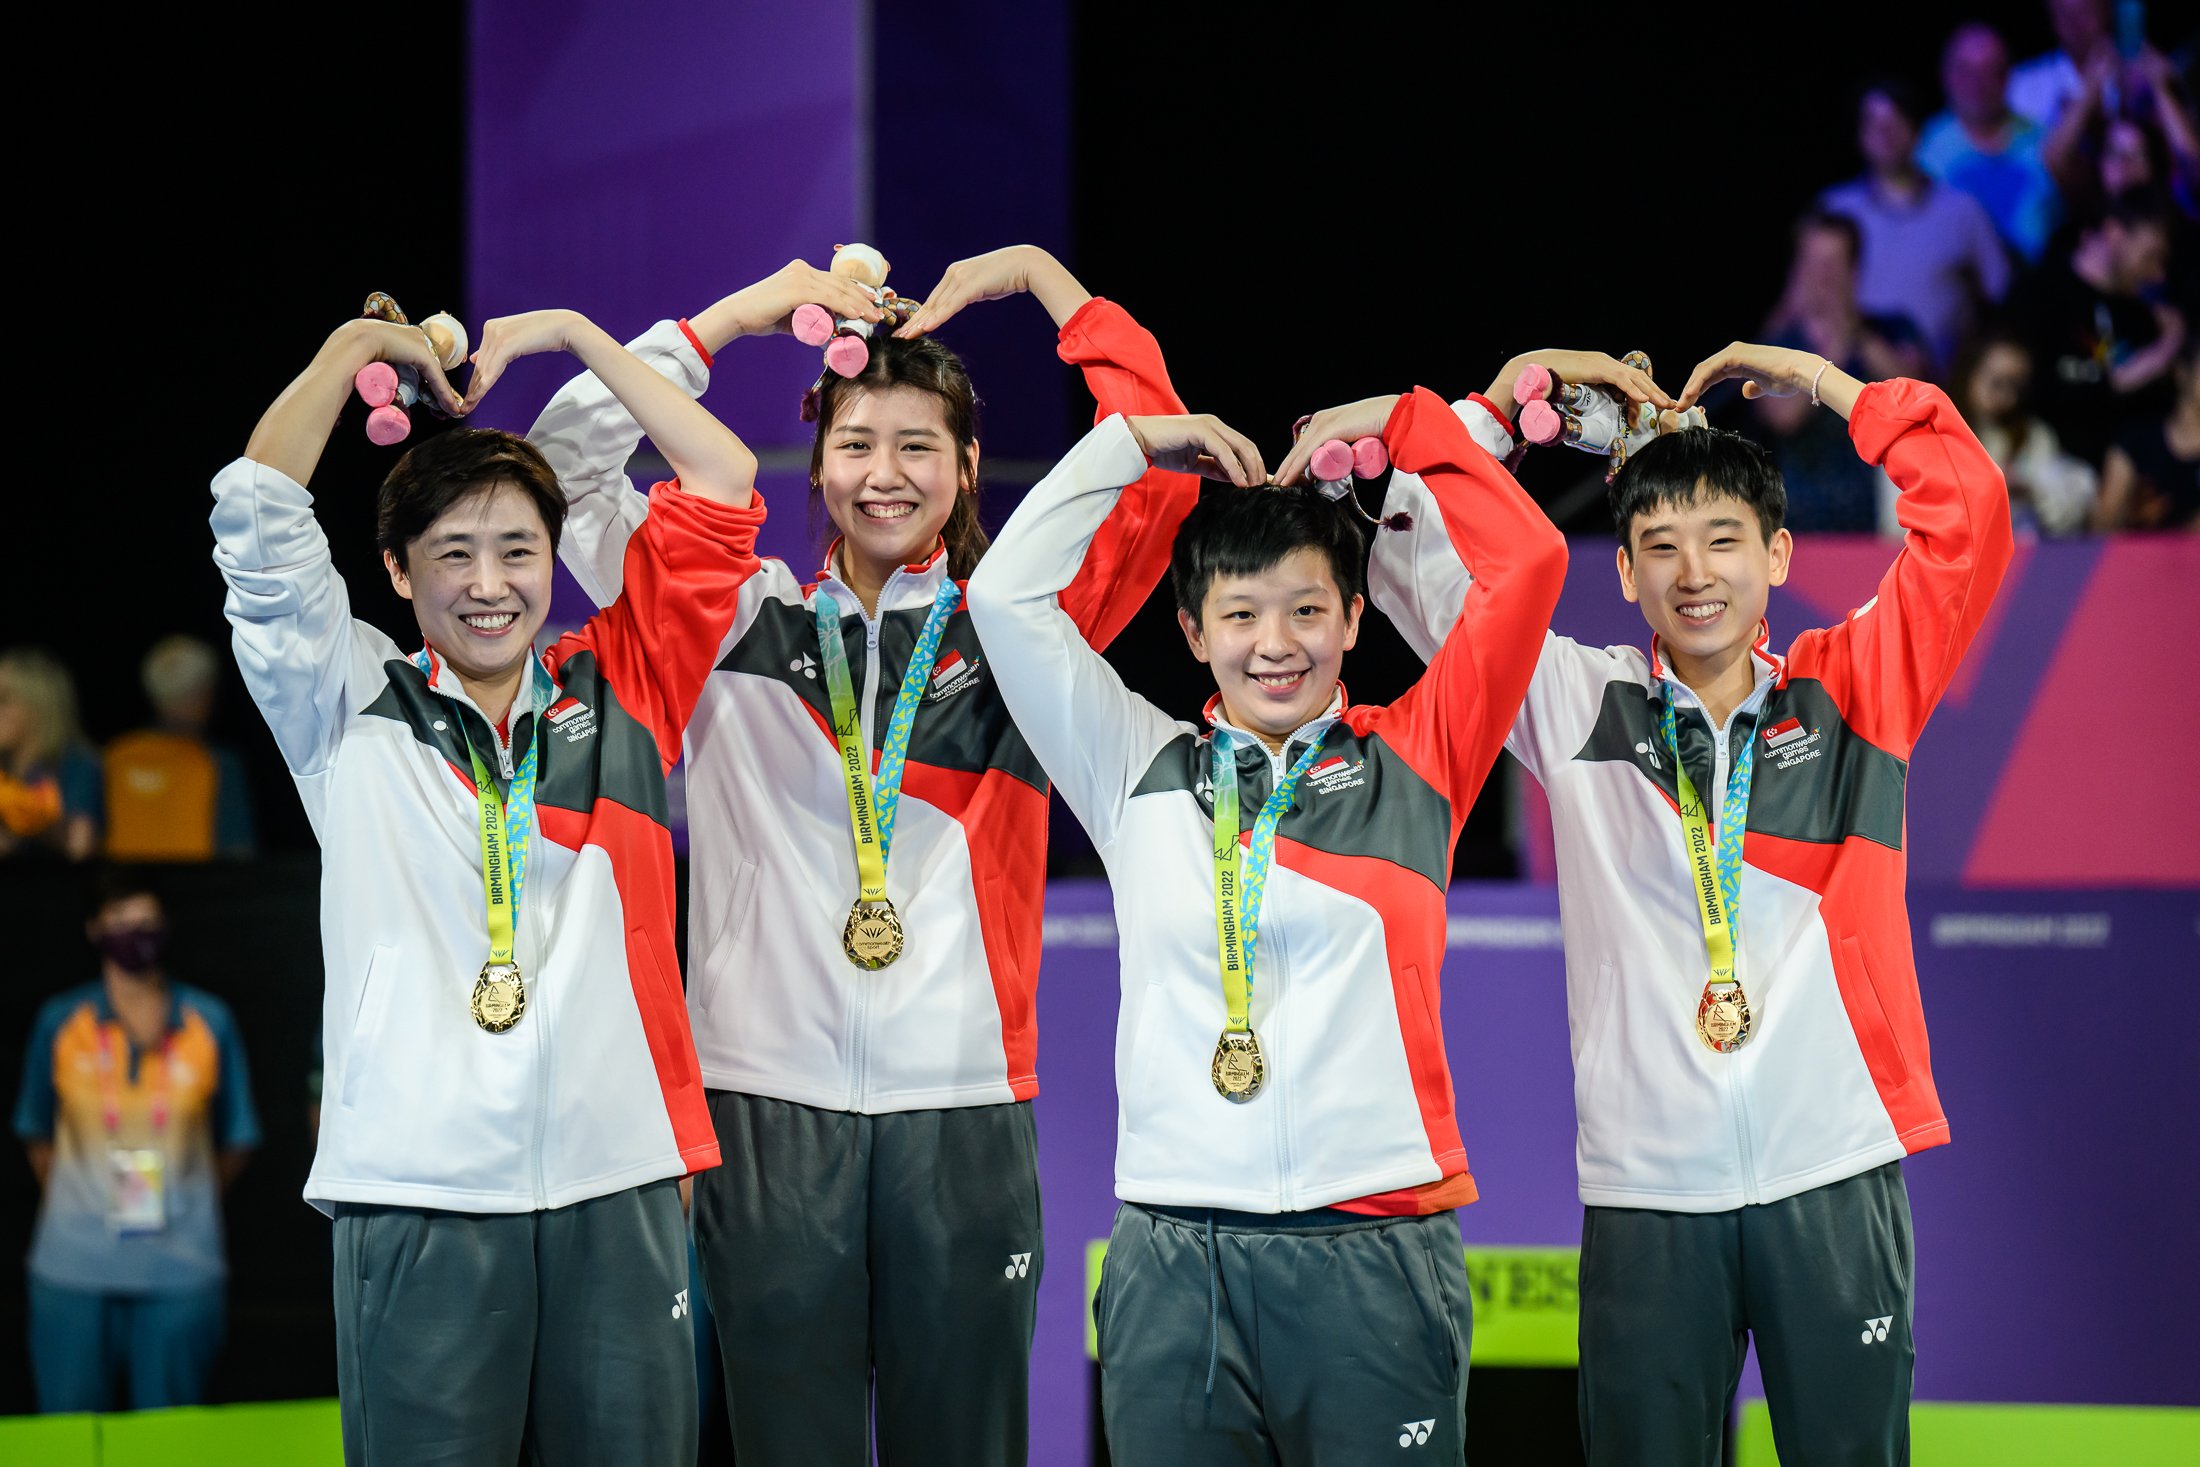 20220801_-_Table Tennis Photo by Andy Chua_078